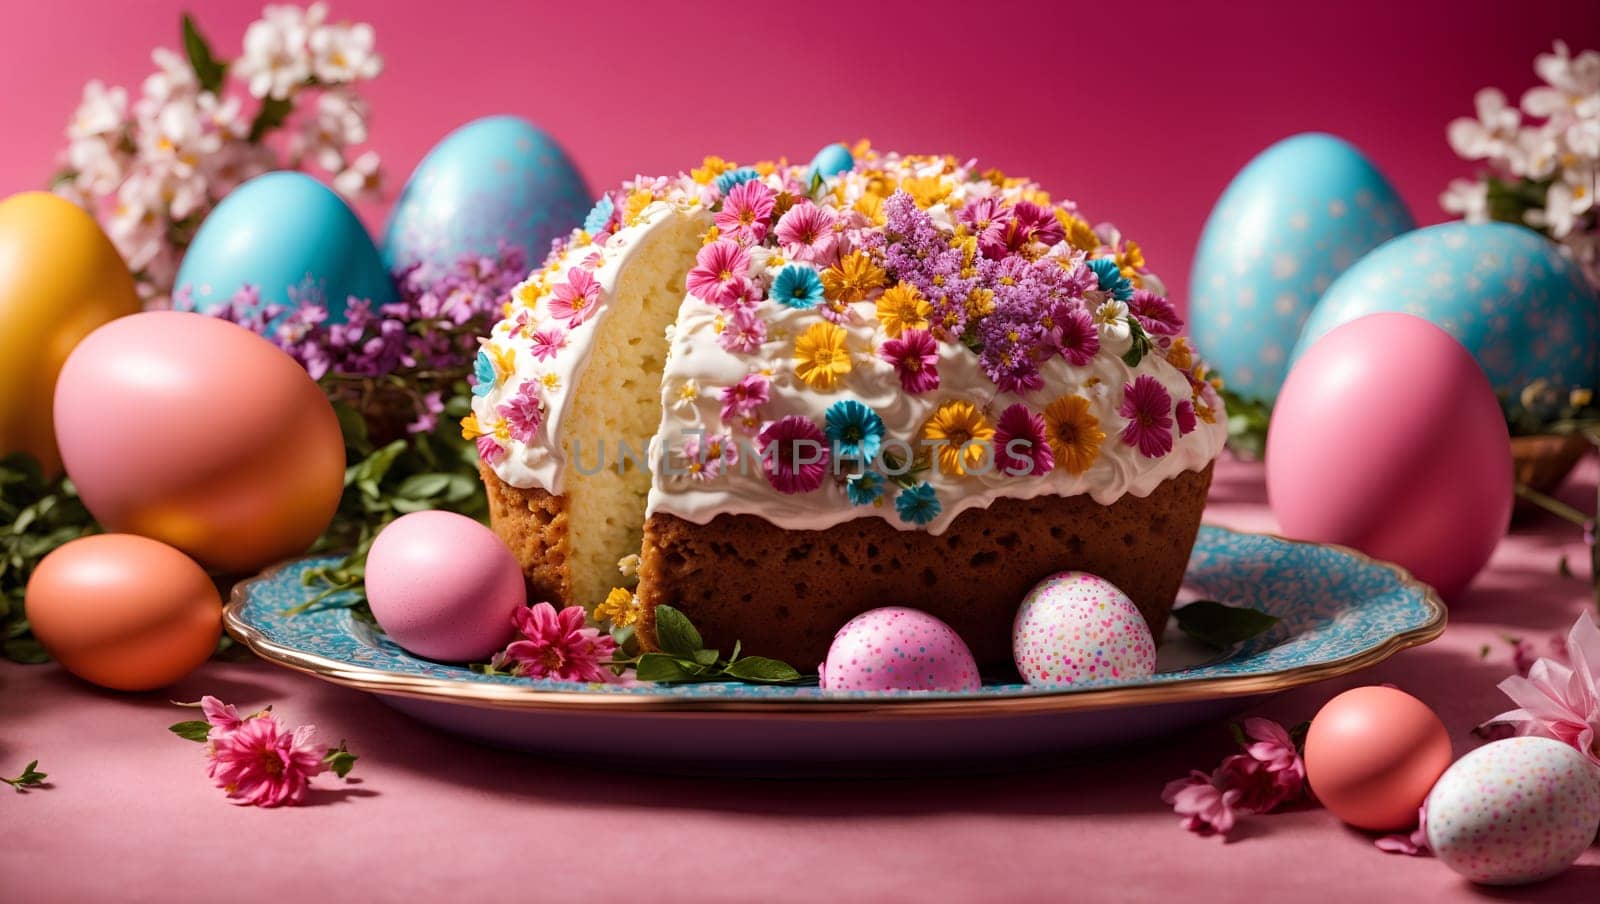 Multicolored Easter cake with Easter eggs by Севостьянов